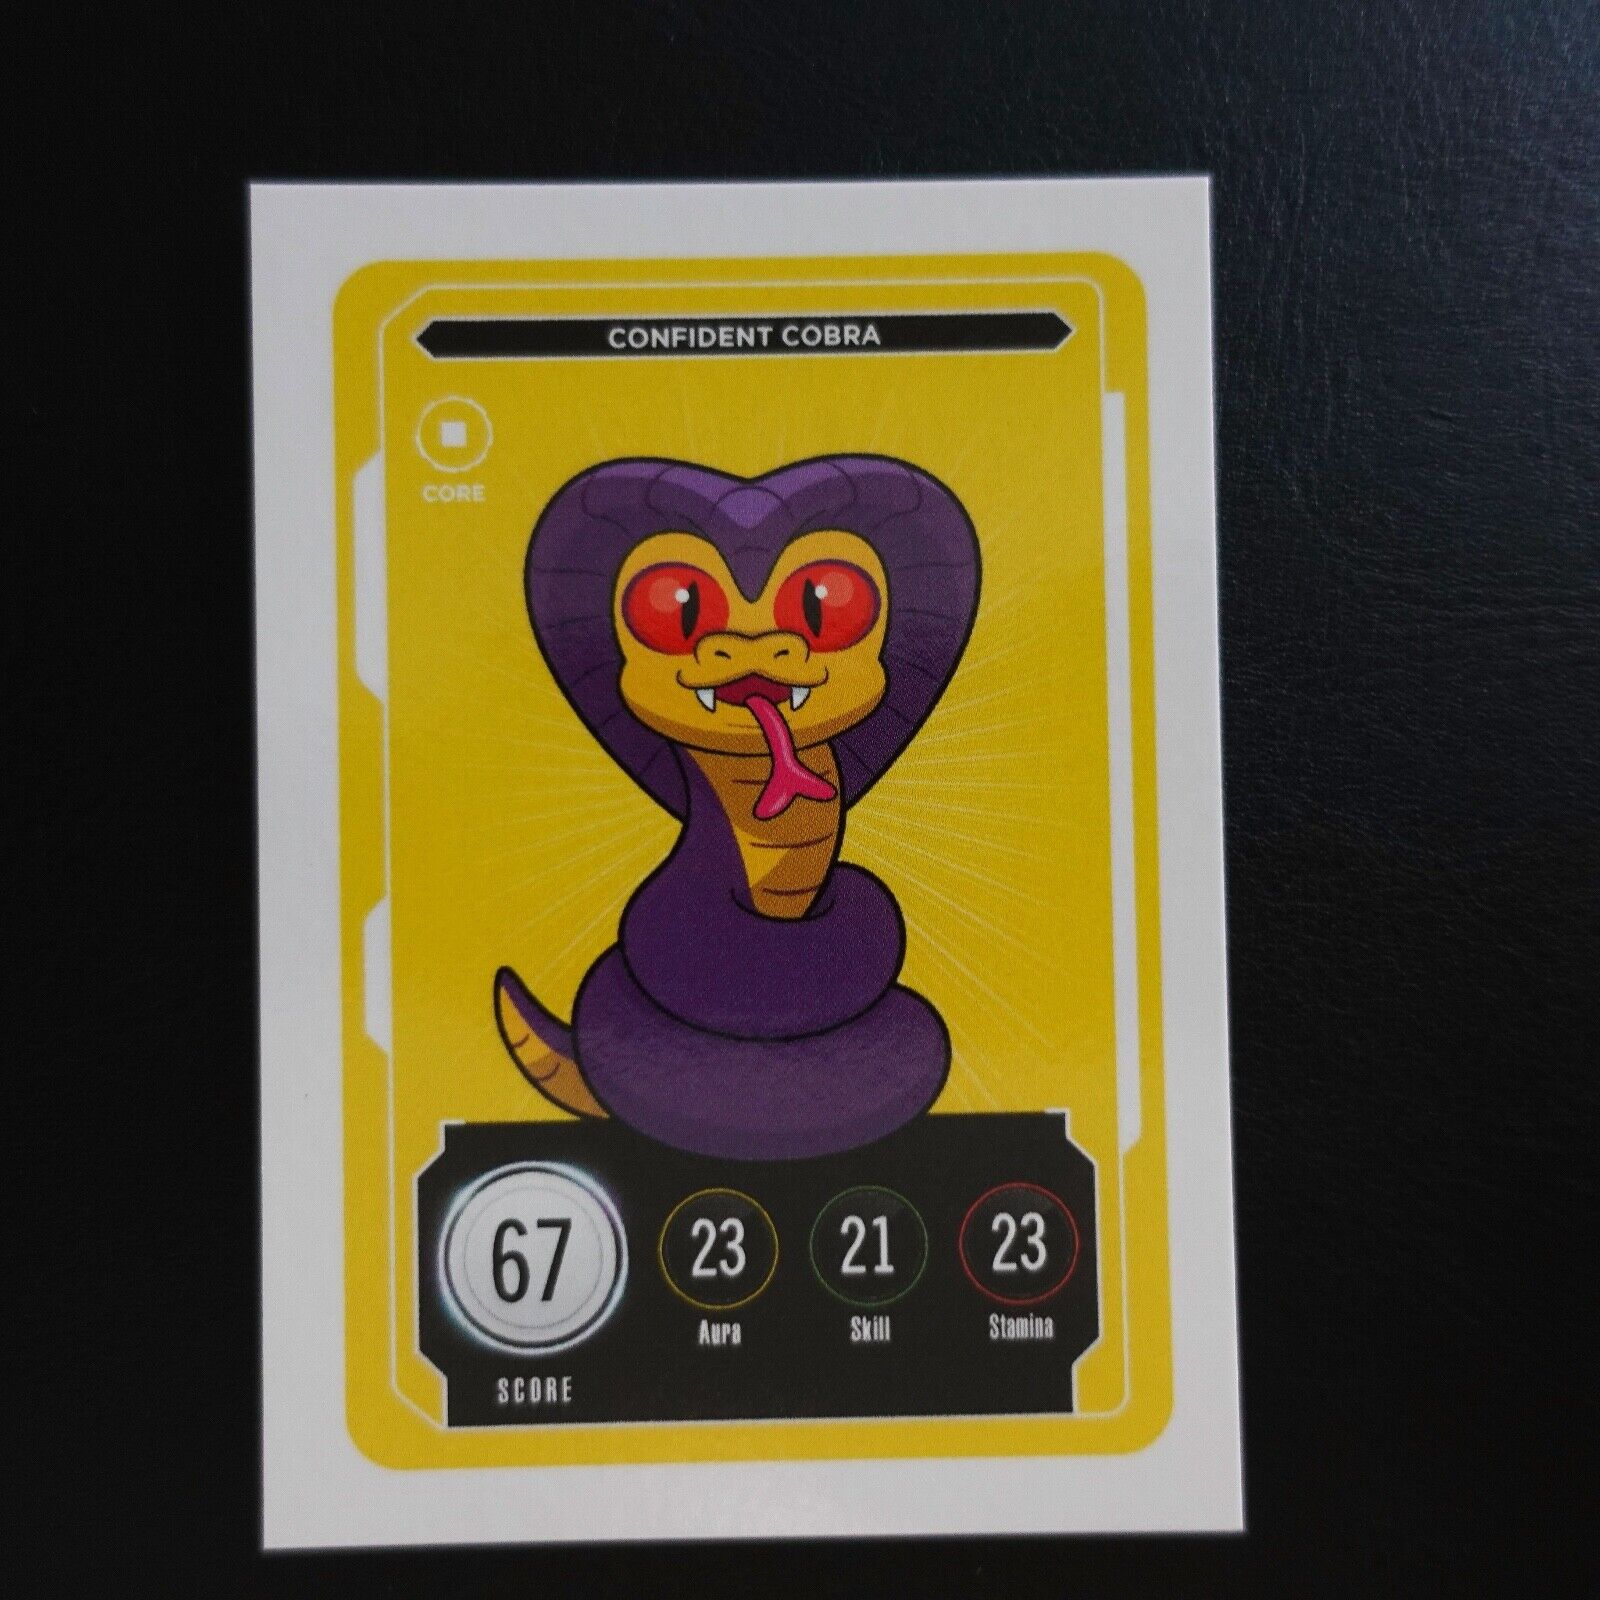 Confident Cobra Veefriends Compete And Collect Series 2 Trading Card Gary